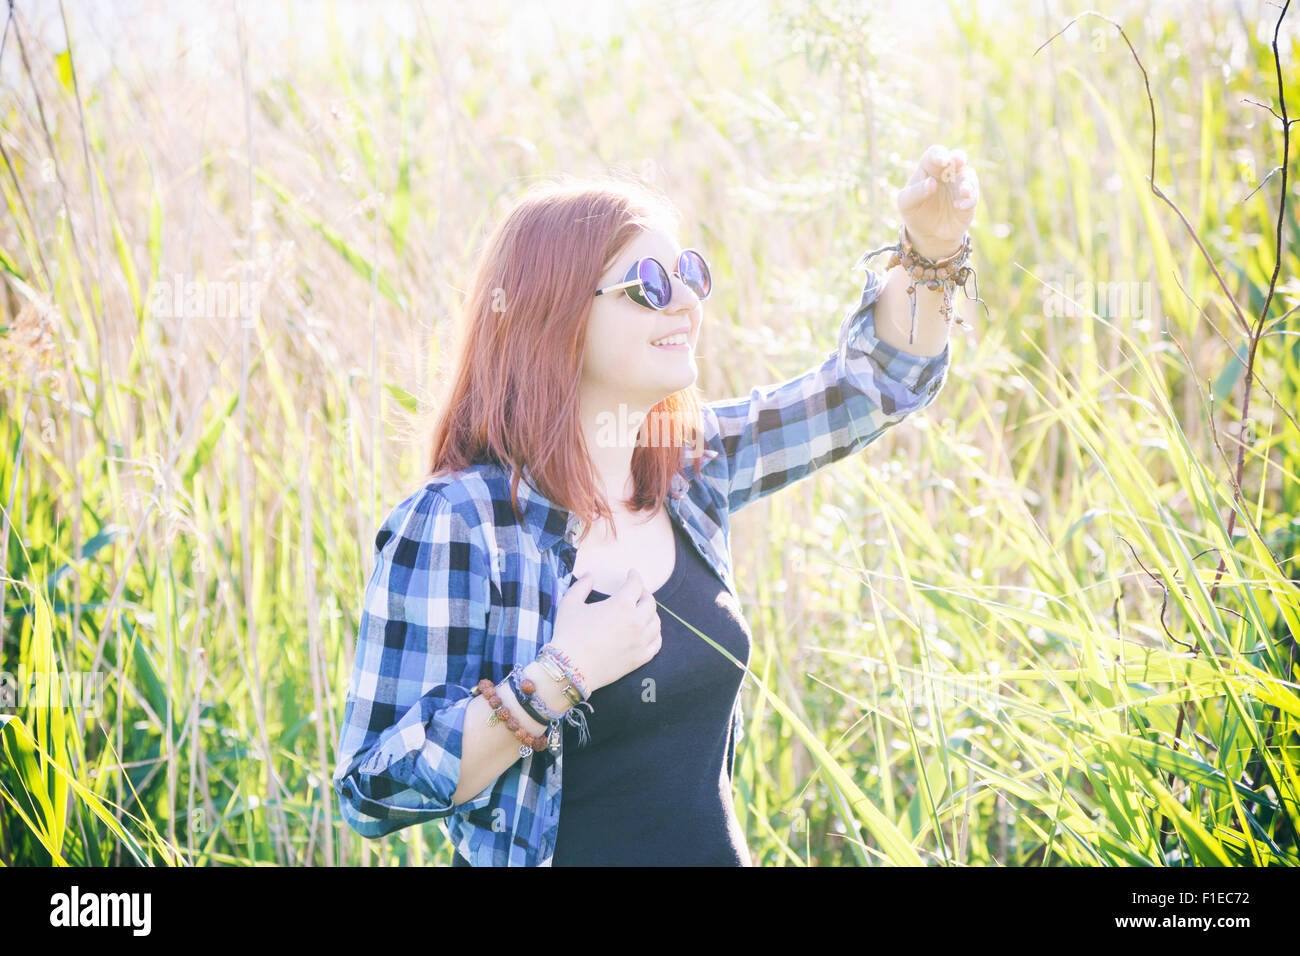 Vintage stylized photo of happy beautiful young woman on summer meadow in tall grass. Stock Photo